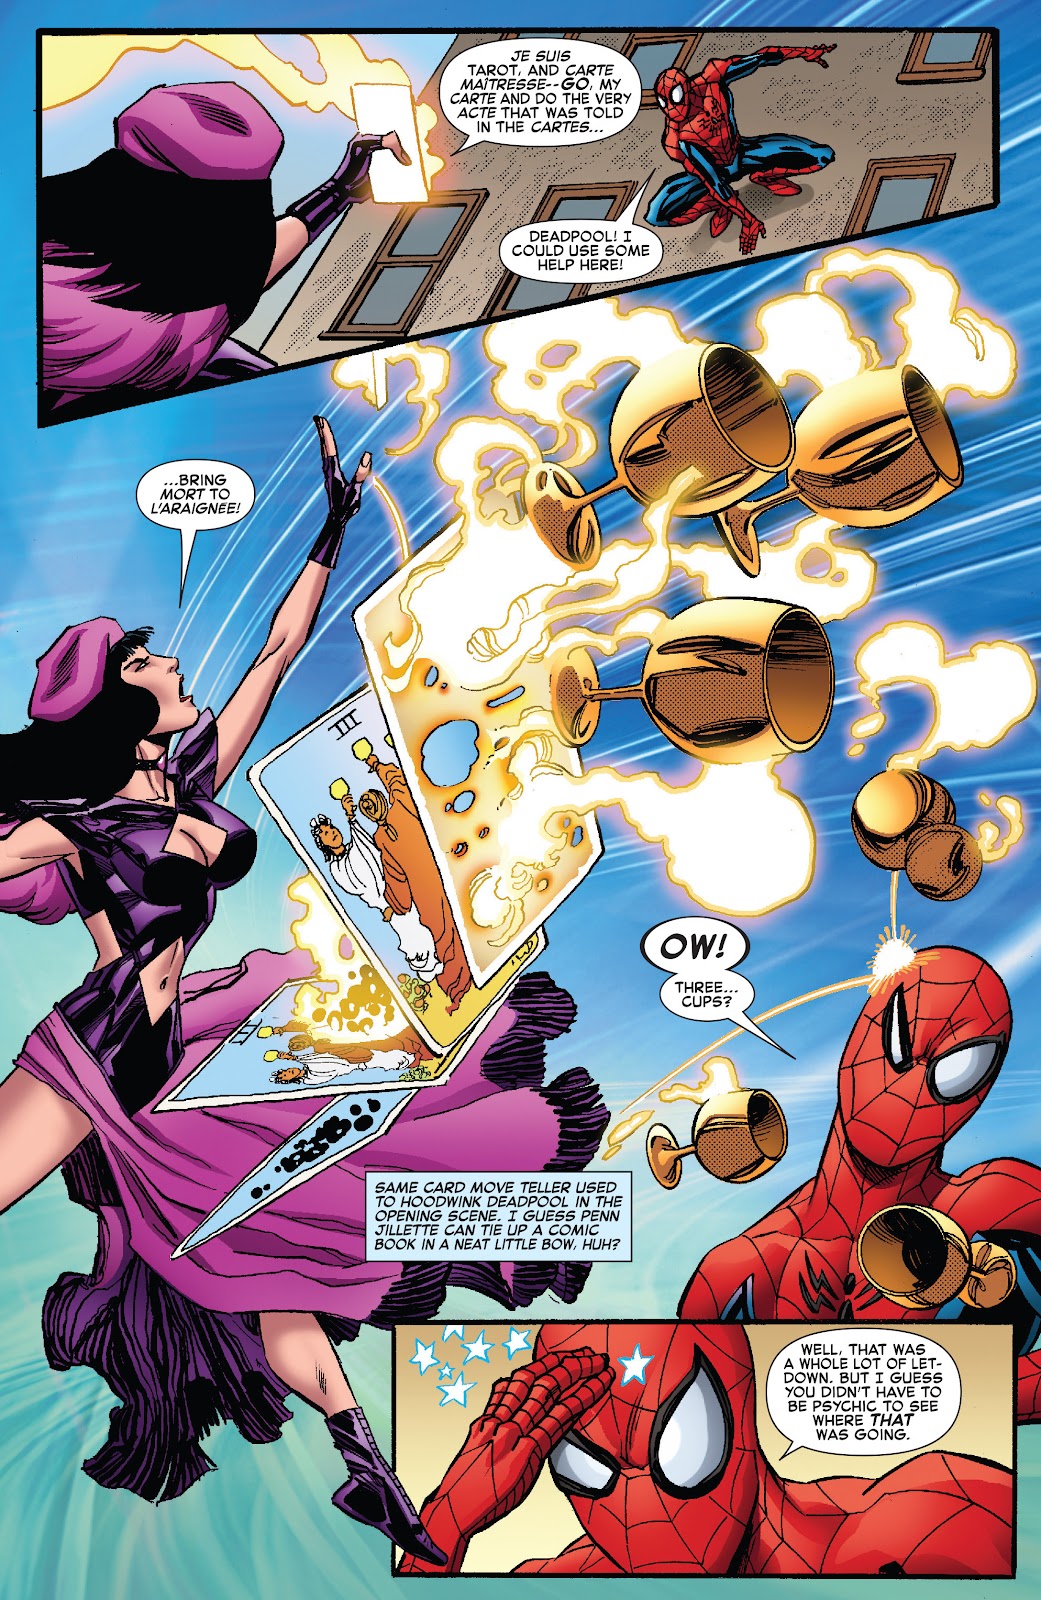 Read Spider-Man/Deadpool Issue #11 Online Page 20